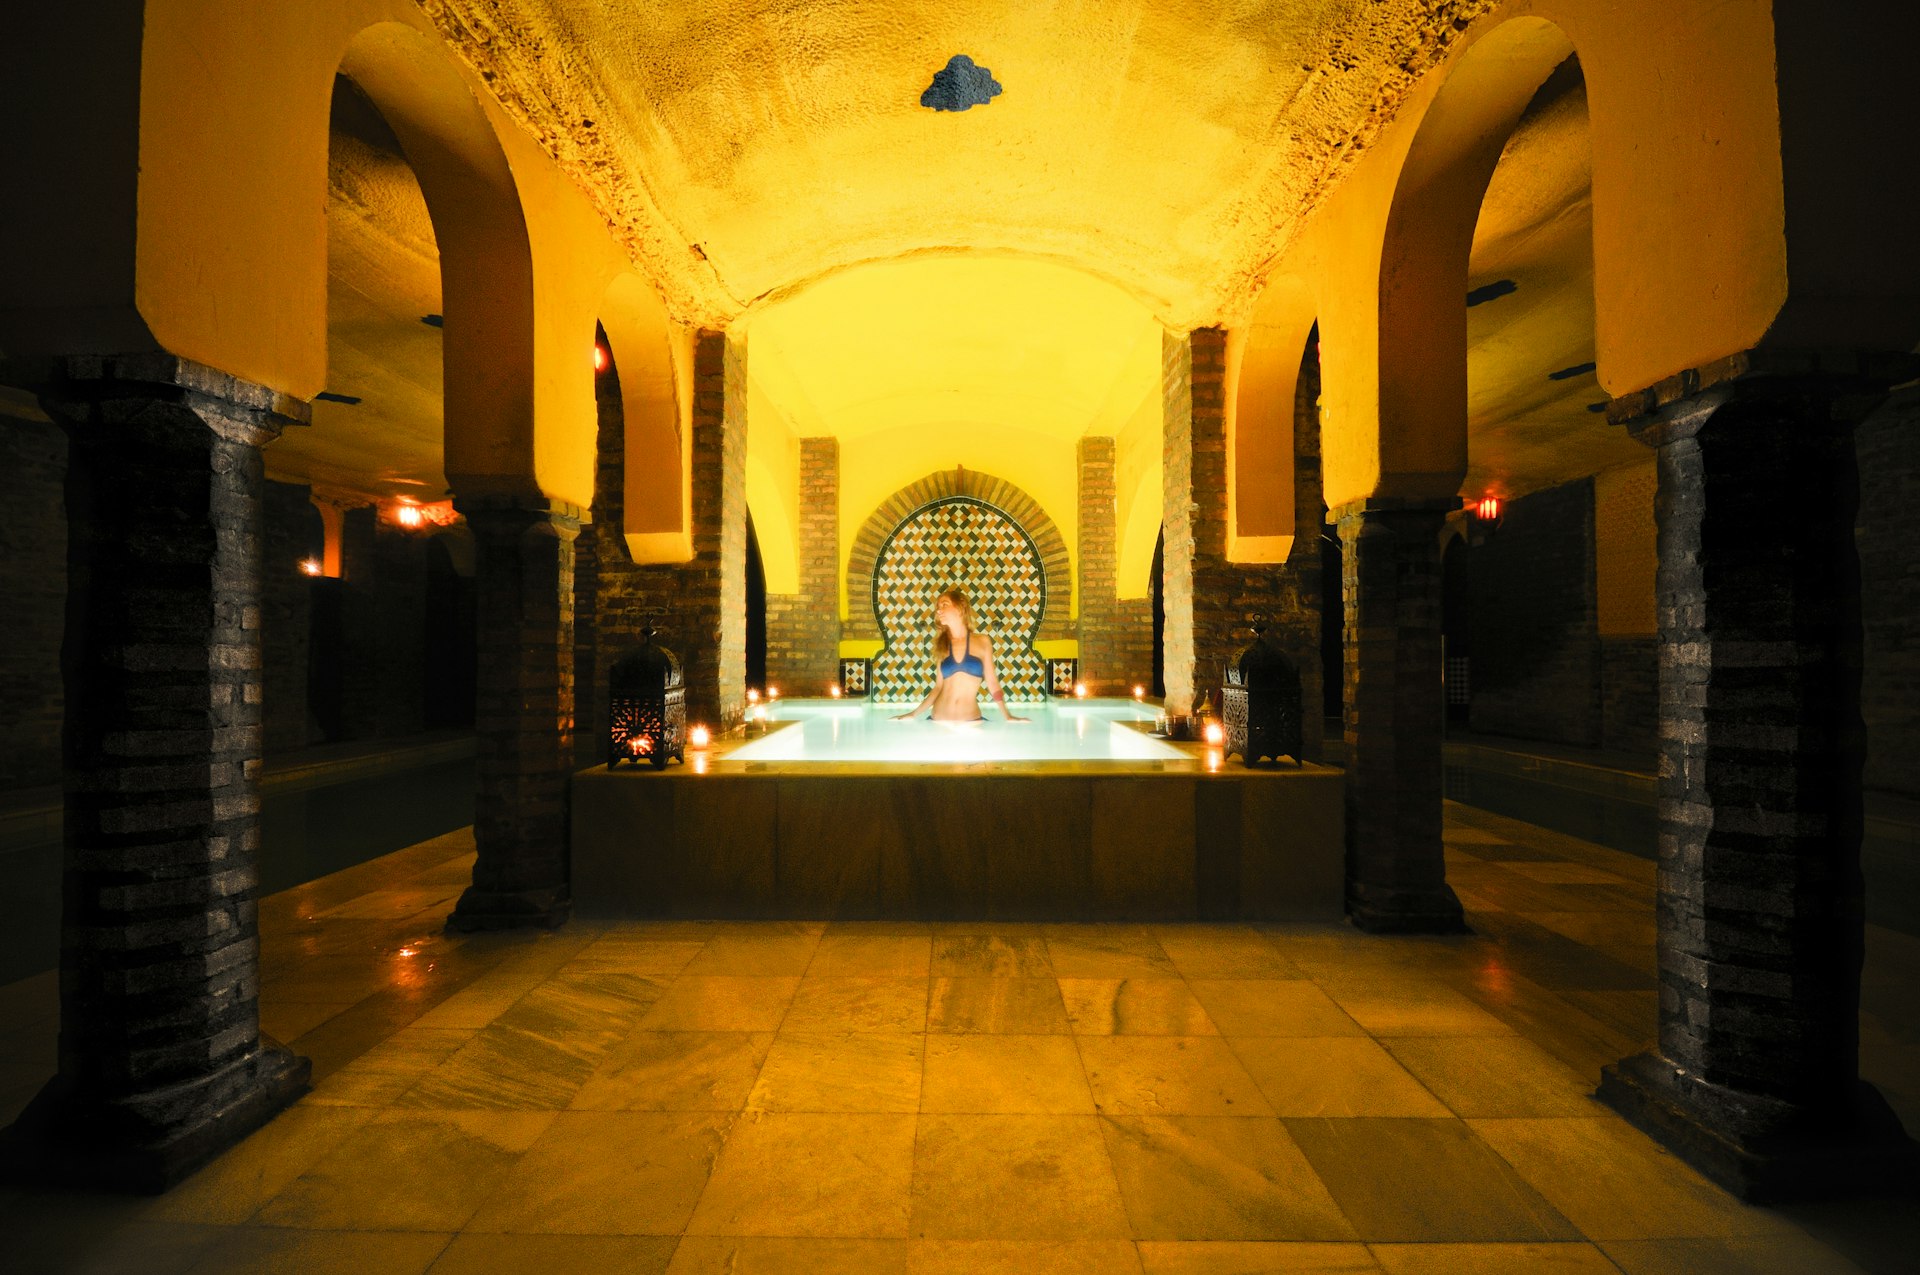 A woman is standing in a pool in a luxurious, romantically lit bathhouse. There are huge stone columns leading to the pool, and intricate tiles behind it.